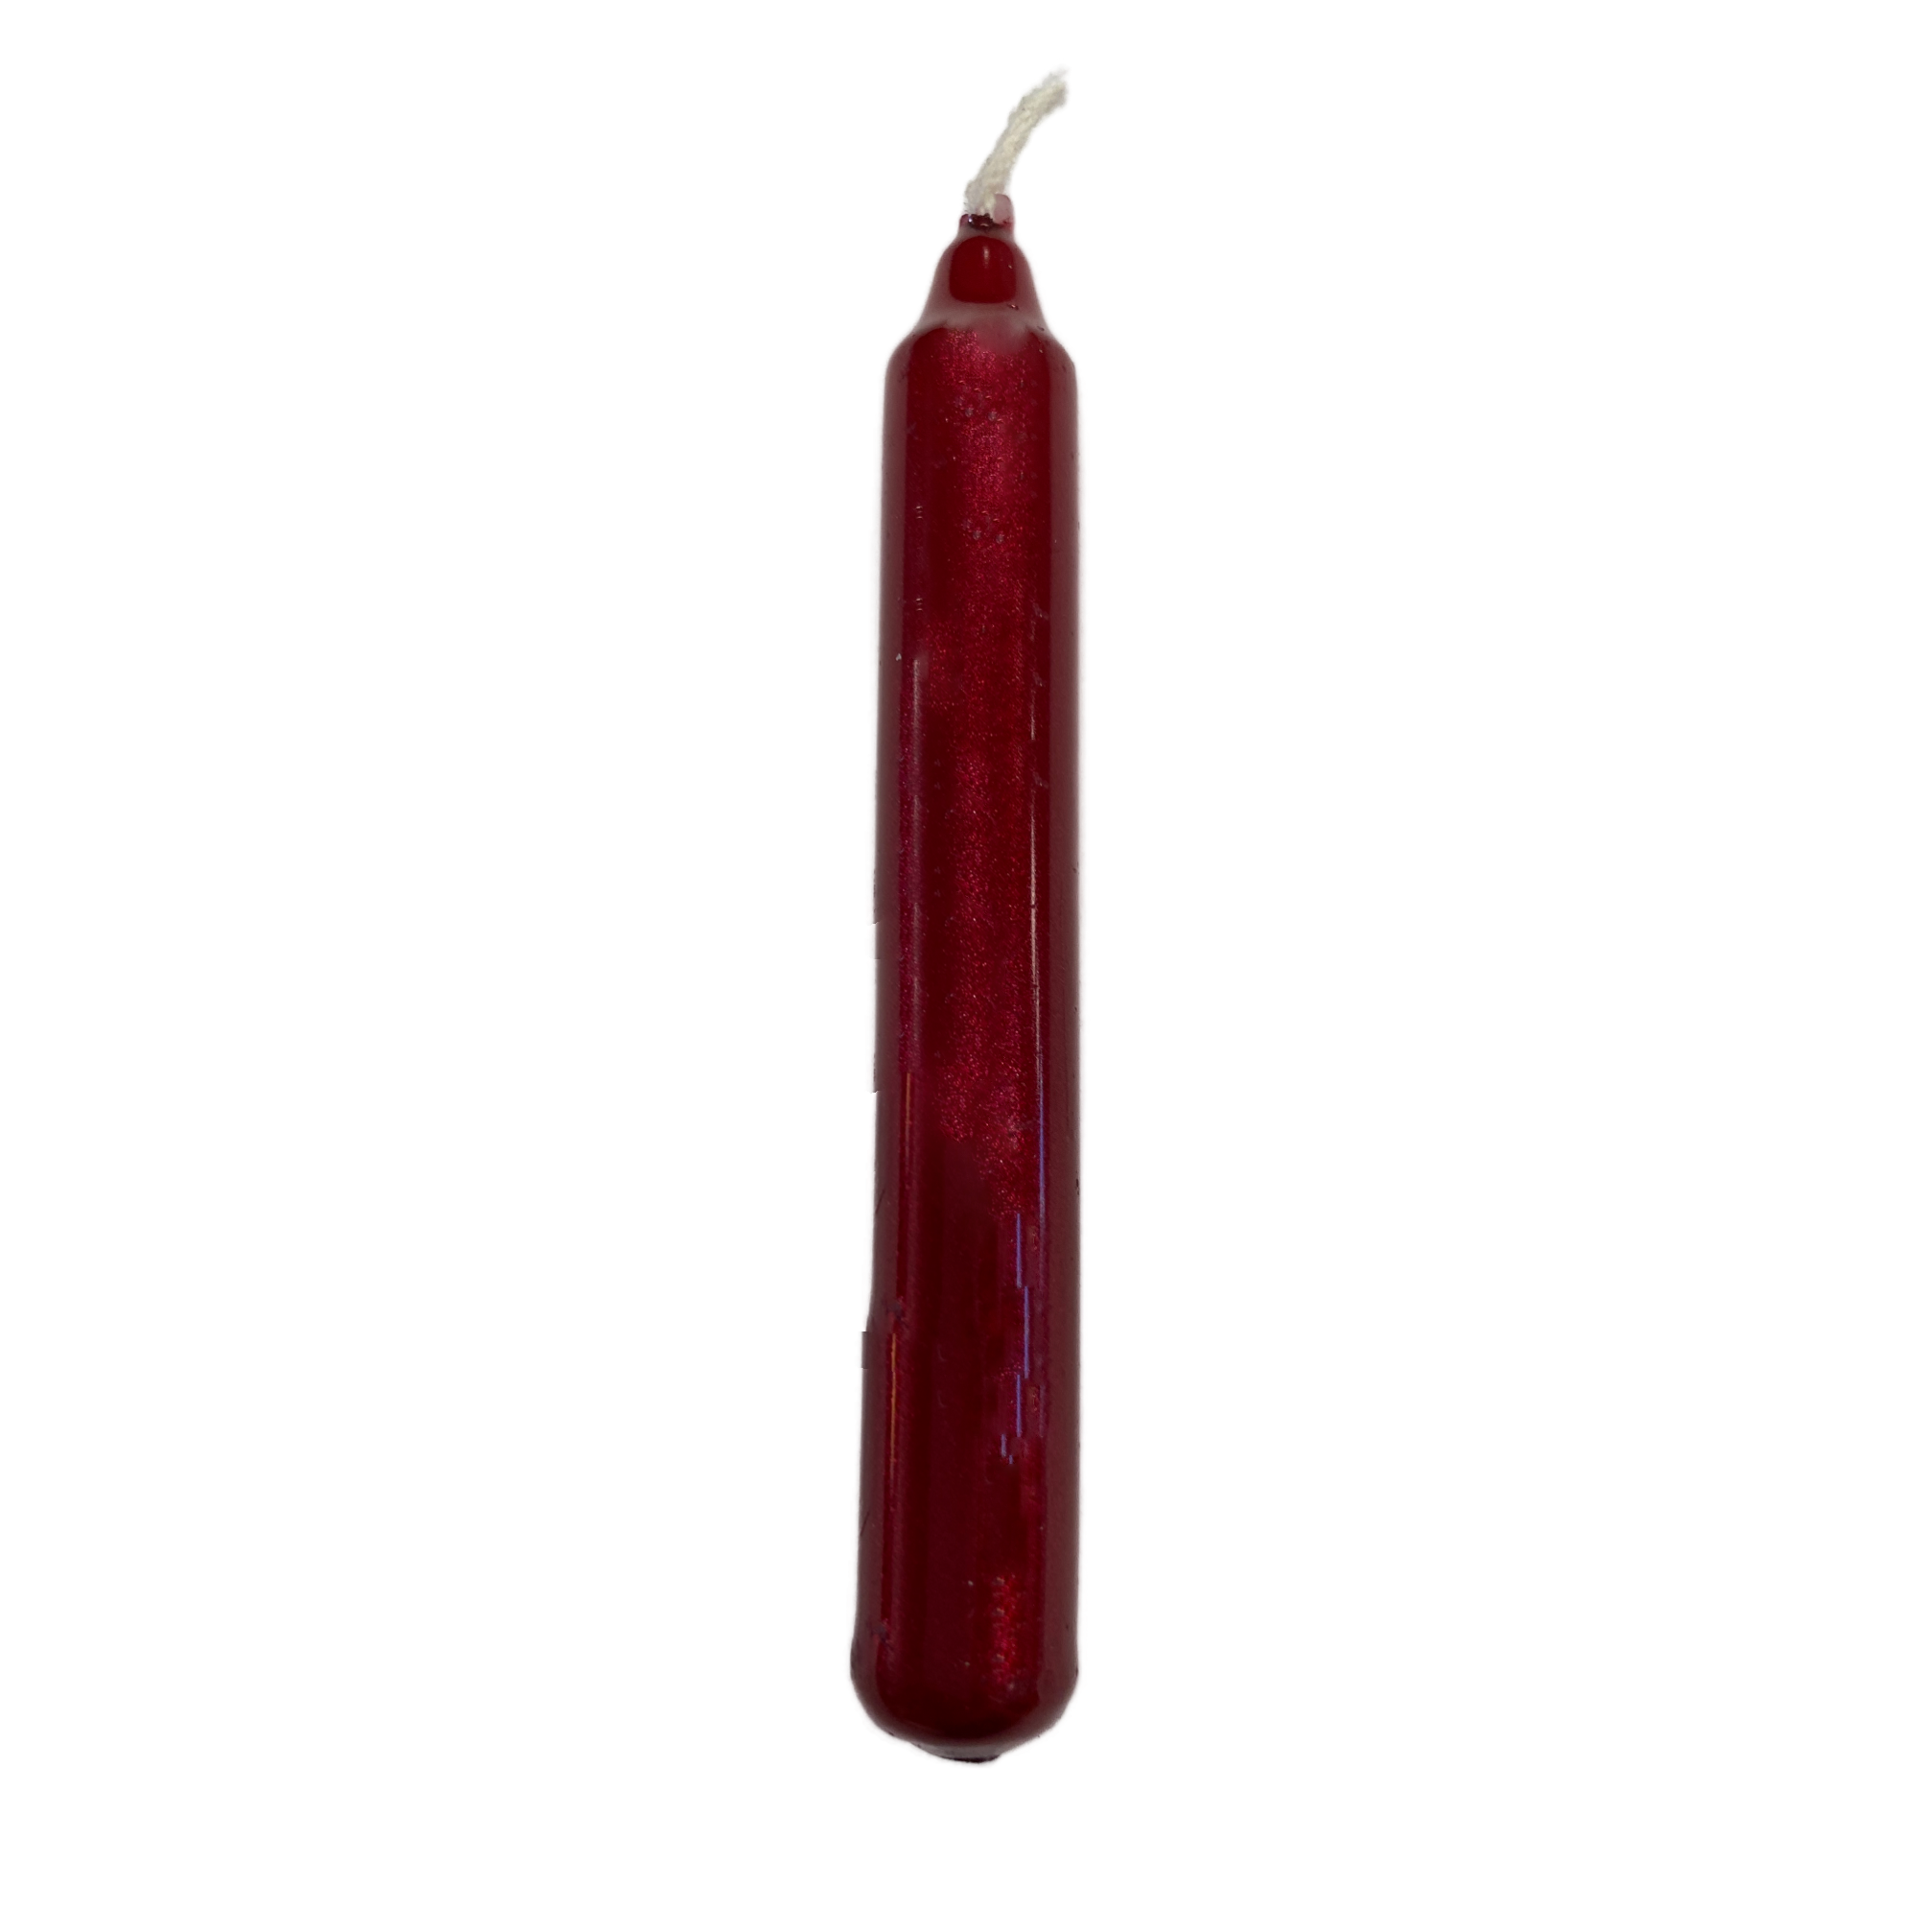 3" metalic red candle 